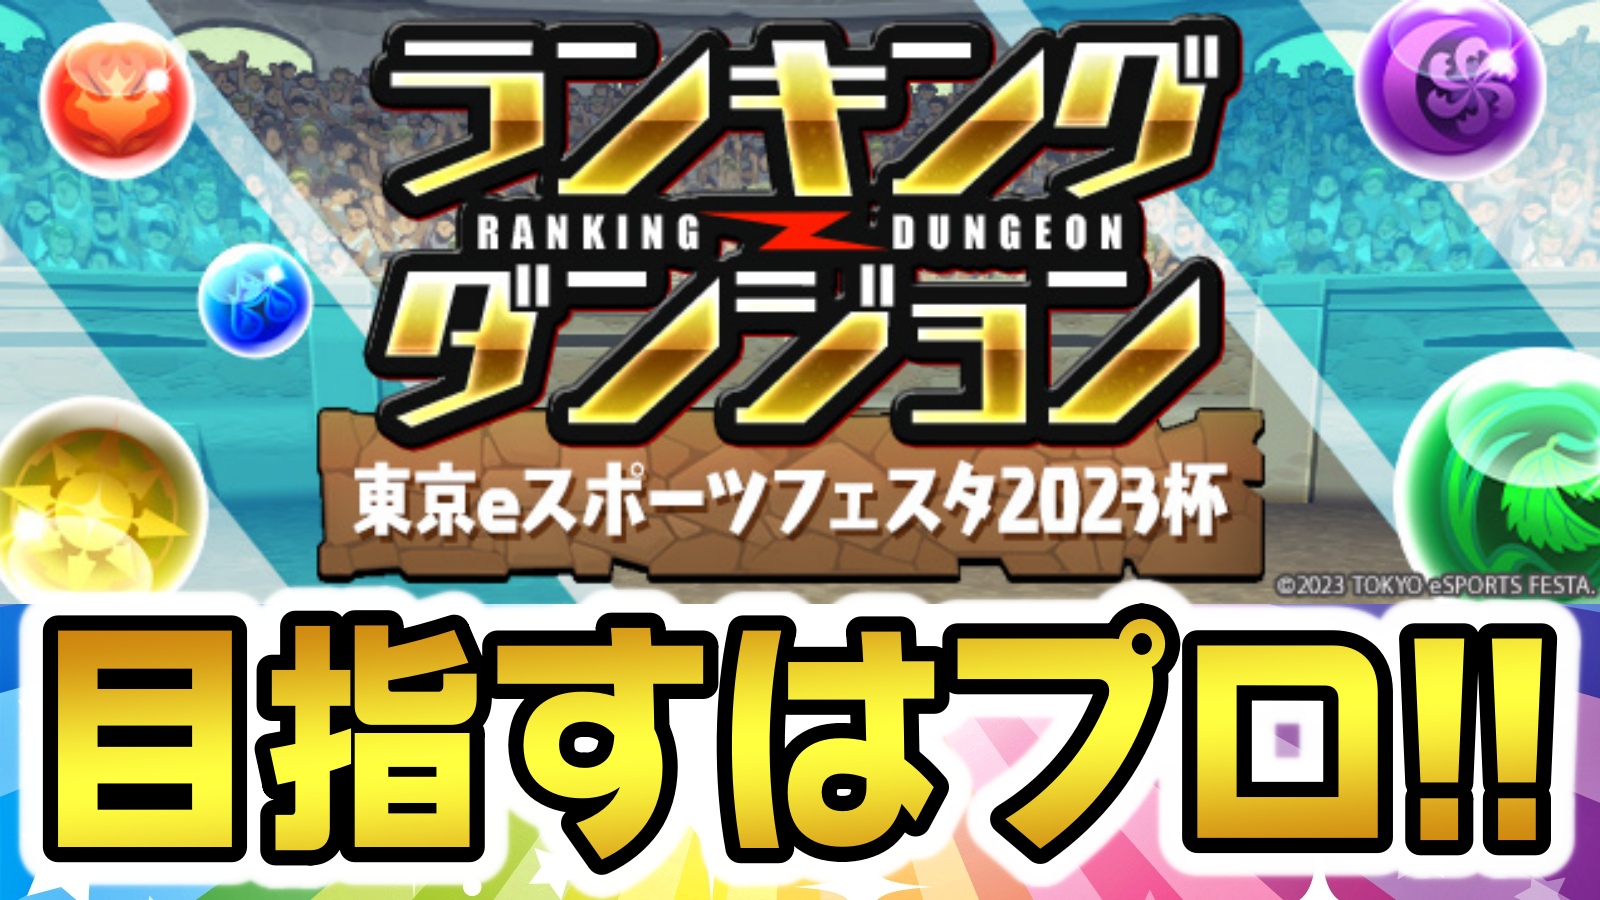 [Puzzle & Dragons] A precious chance to become a professional appears! Ranking Dungeon (Tokyo e-Sports Festa …